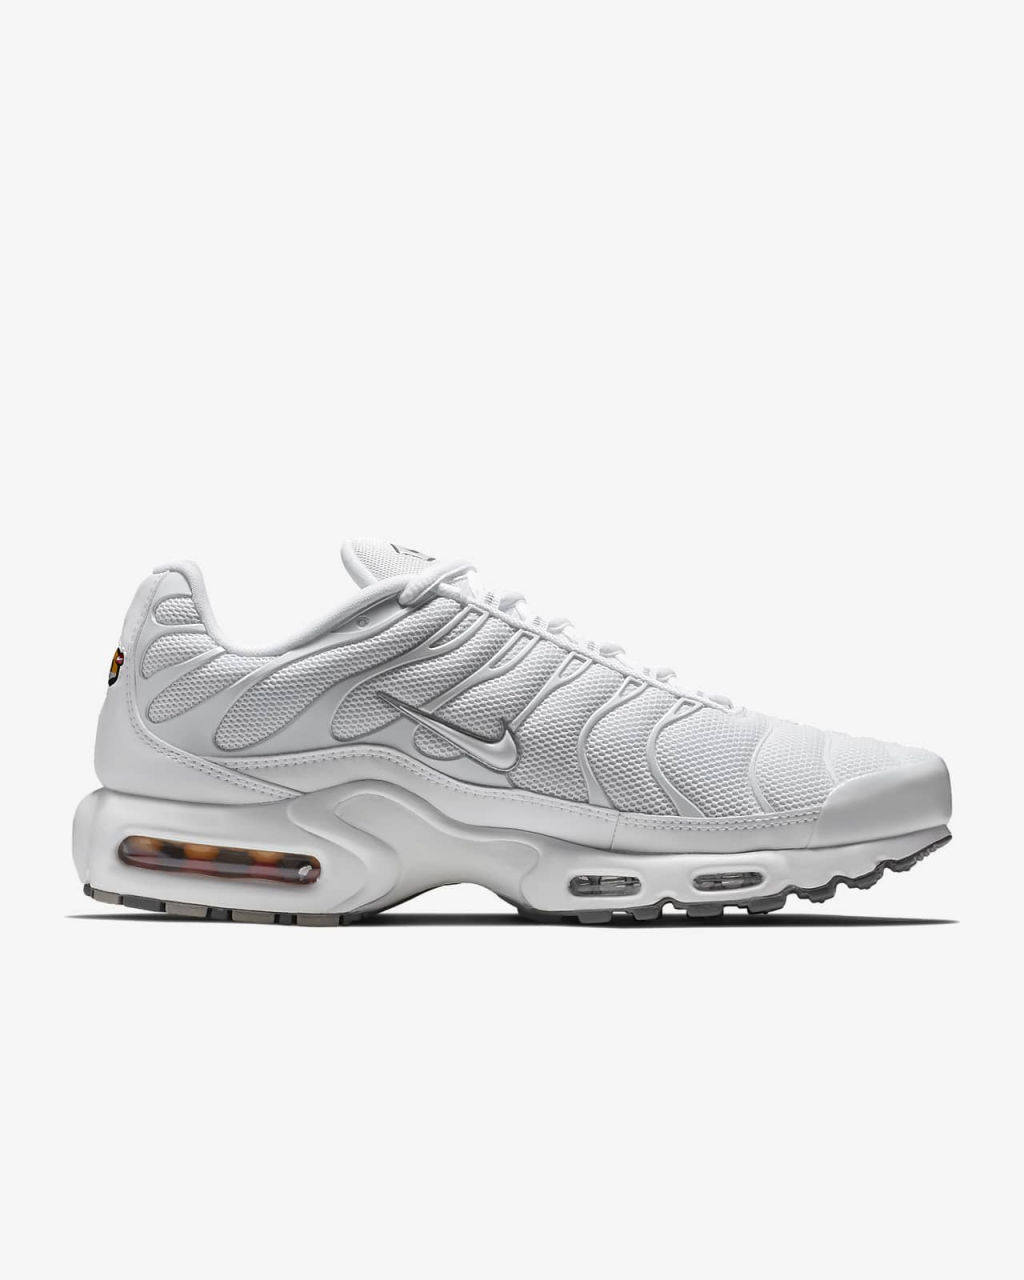 Picture of: Nike Air Max Plus Herrenschuh